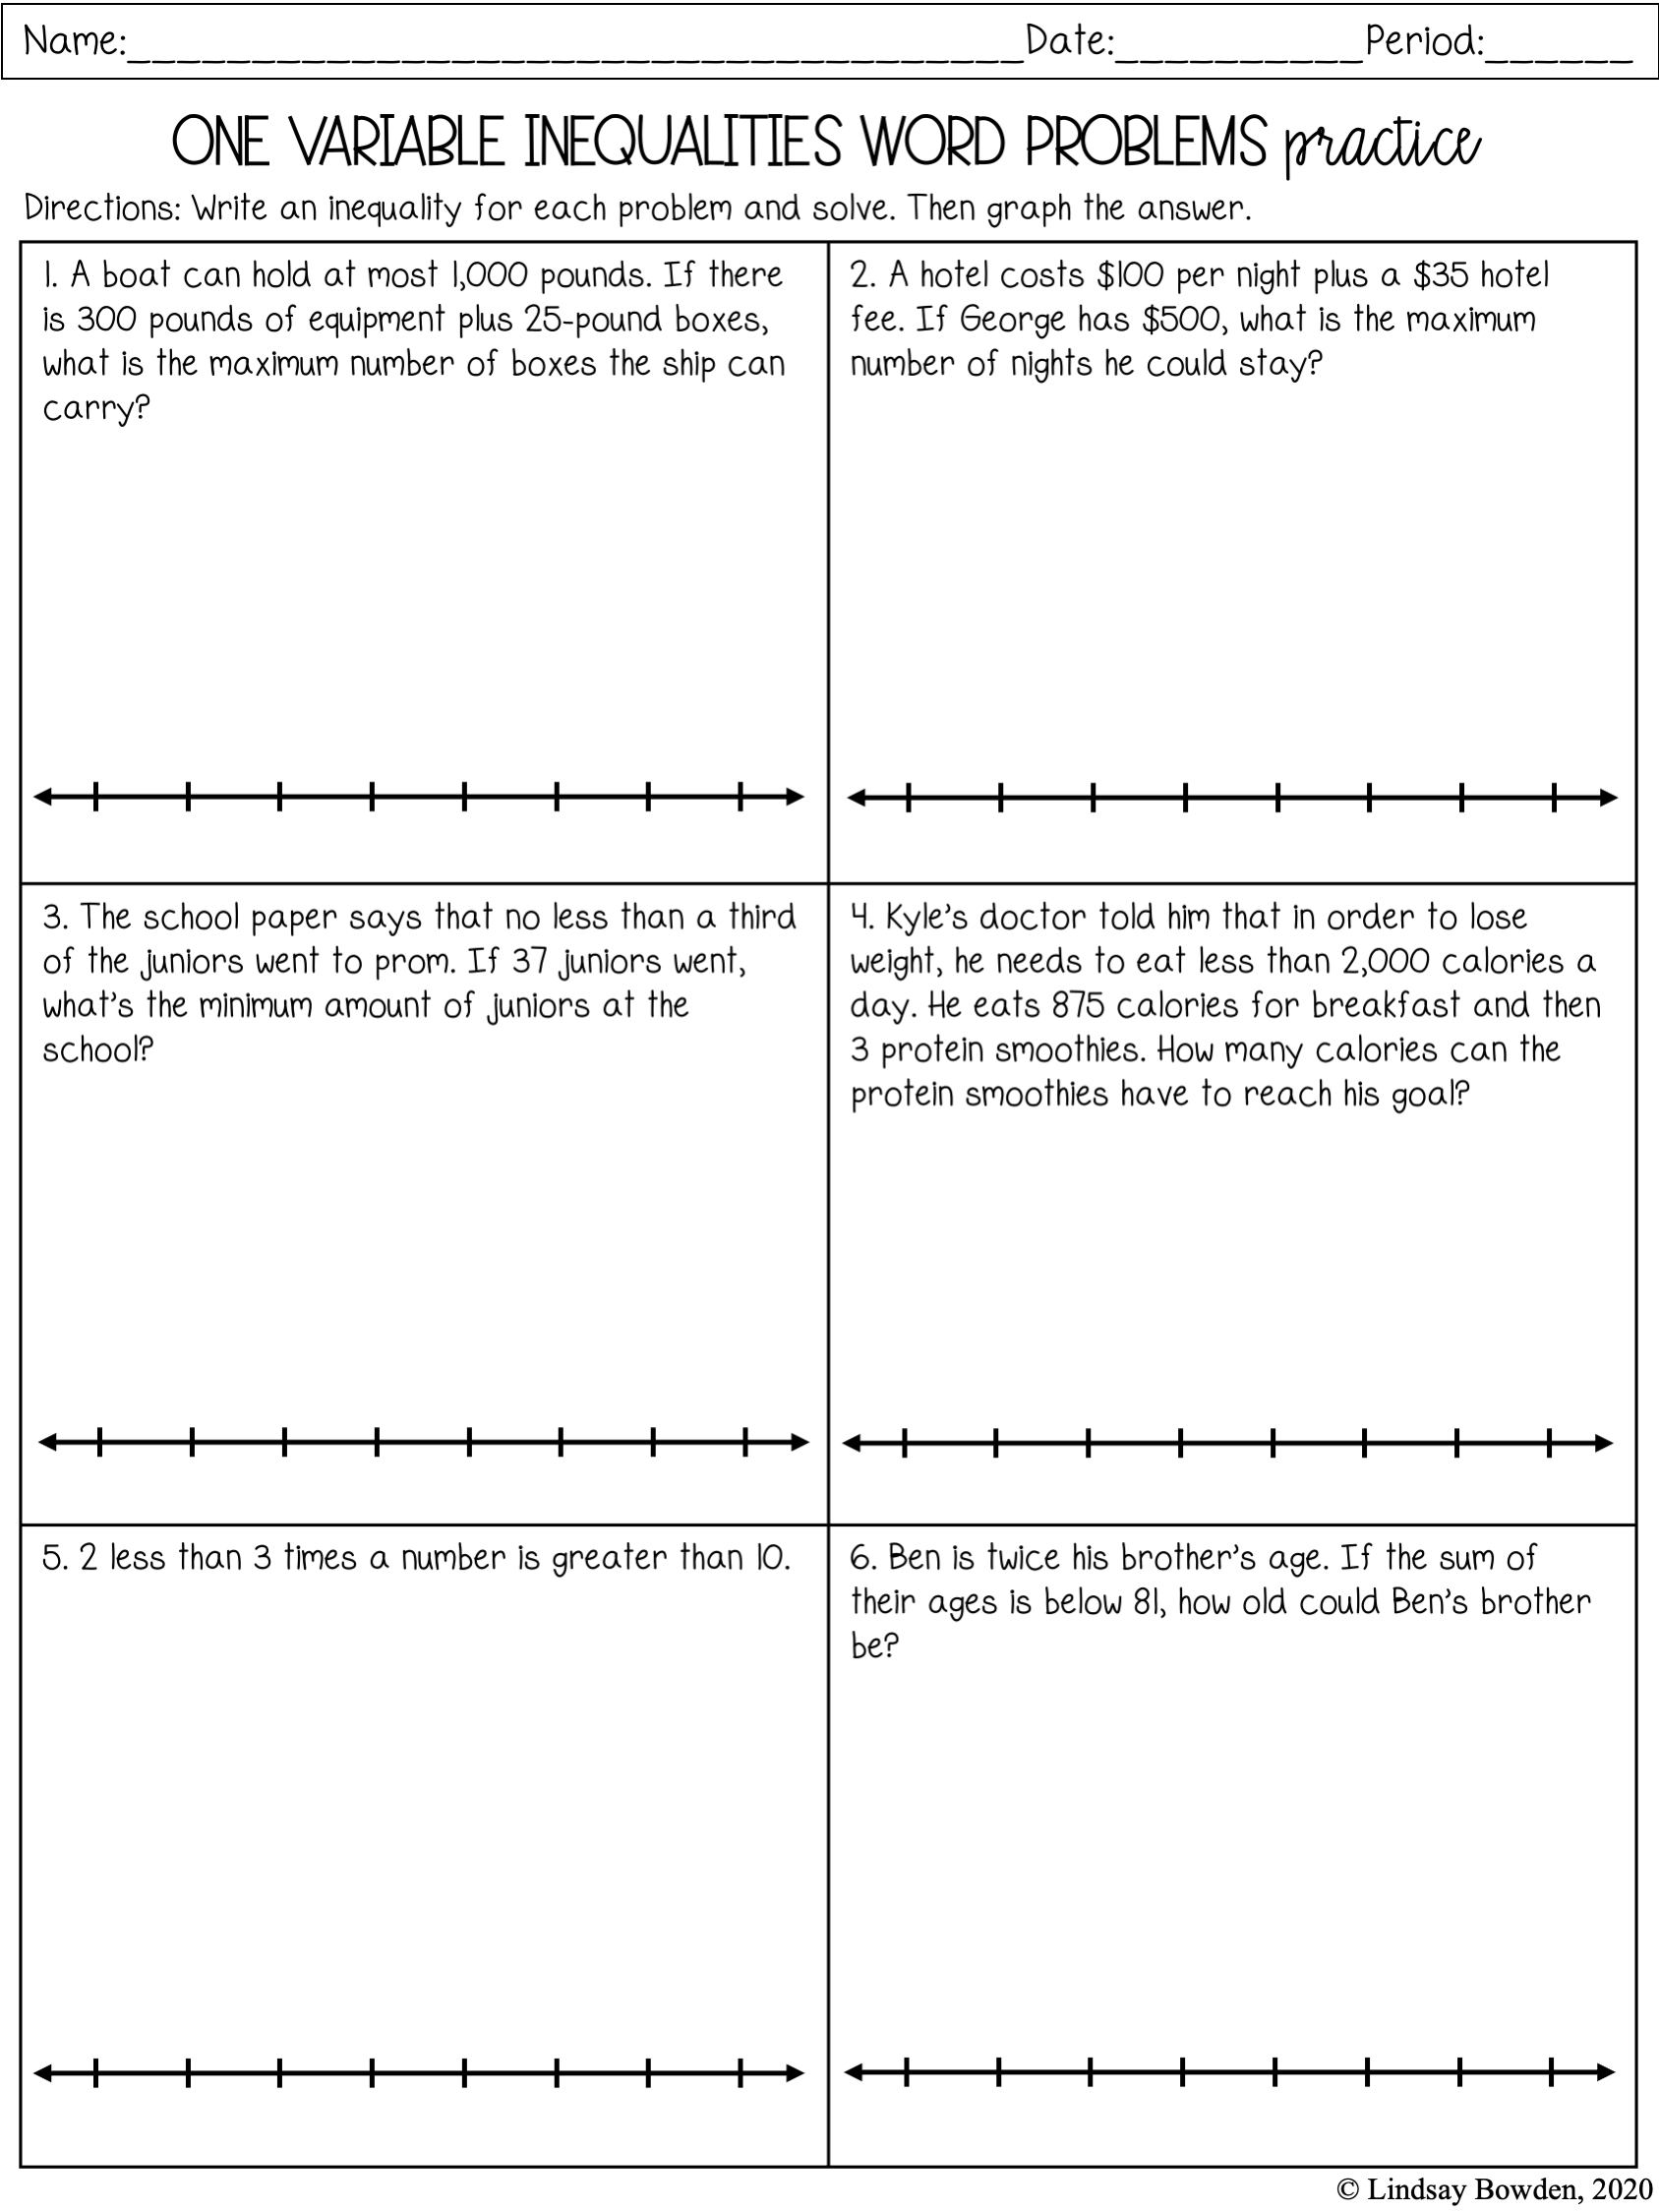 One Variable Inequalities Notes and Worksheets Lindsay Bowden